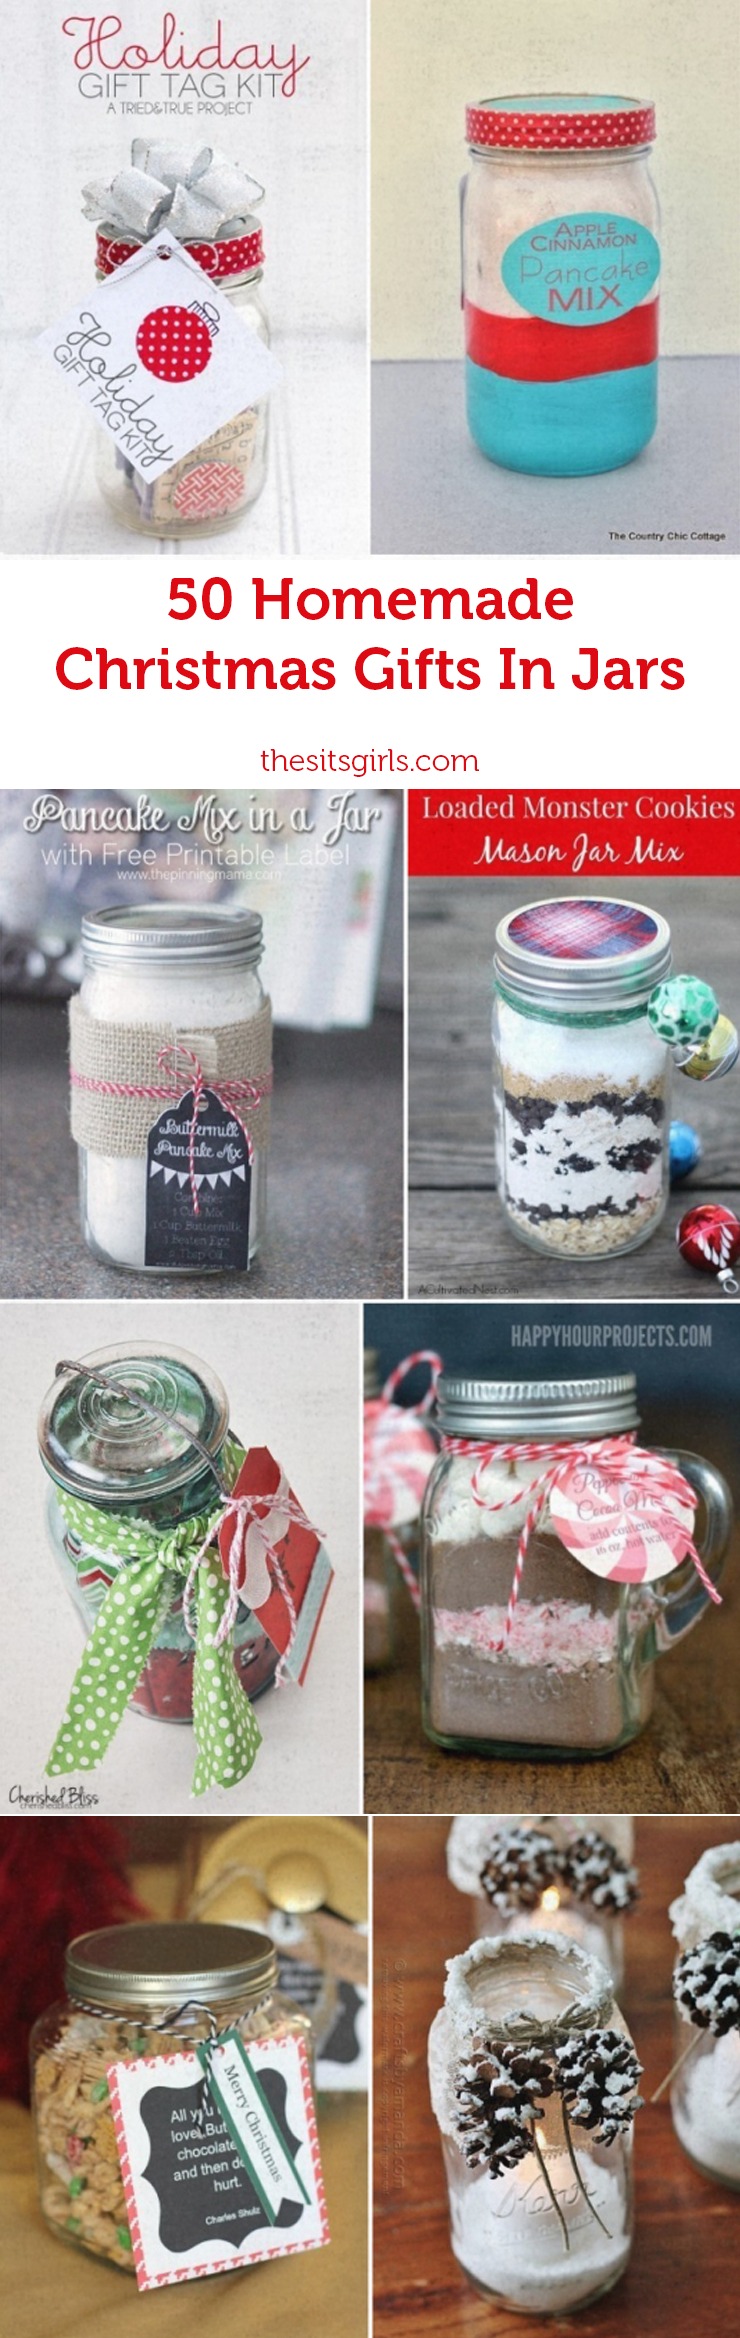 Homemade Christmas Gift Ideas | Cute Christmas gifts in jars for your friends and family. 